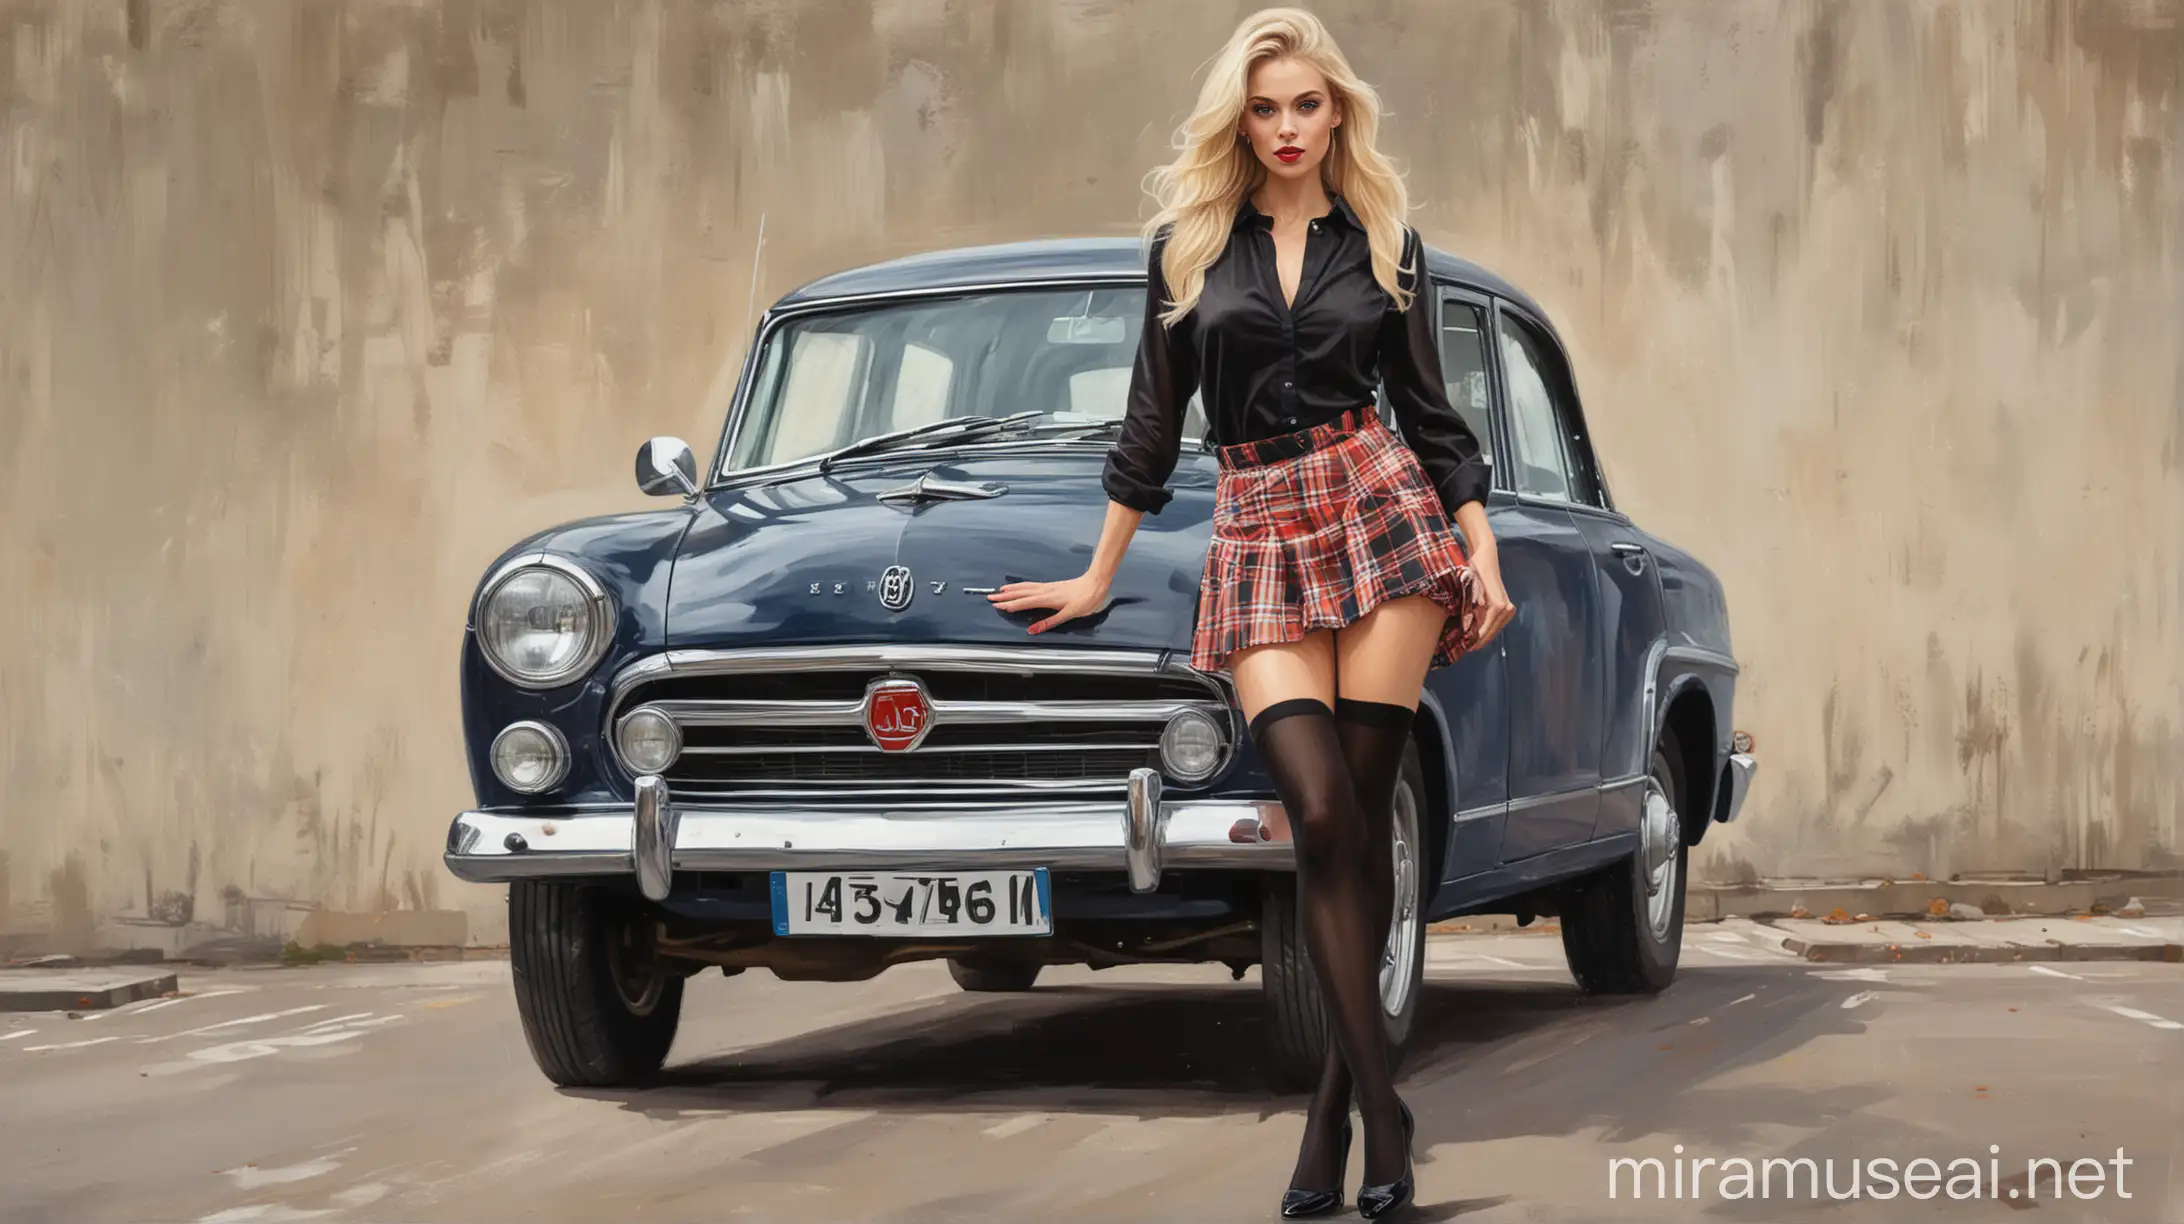 Blonde Woman in Black Stockings and Heels Standing by a Car